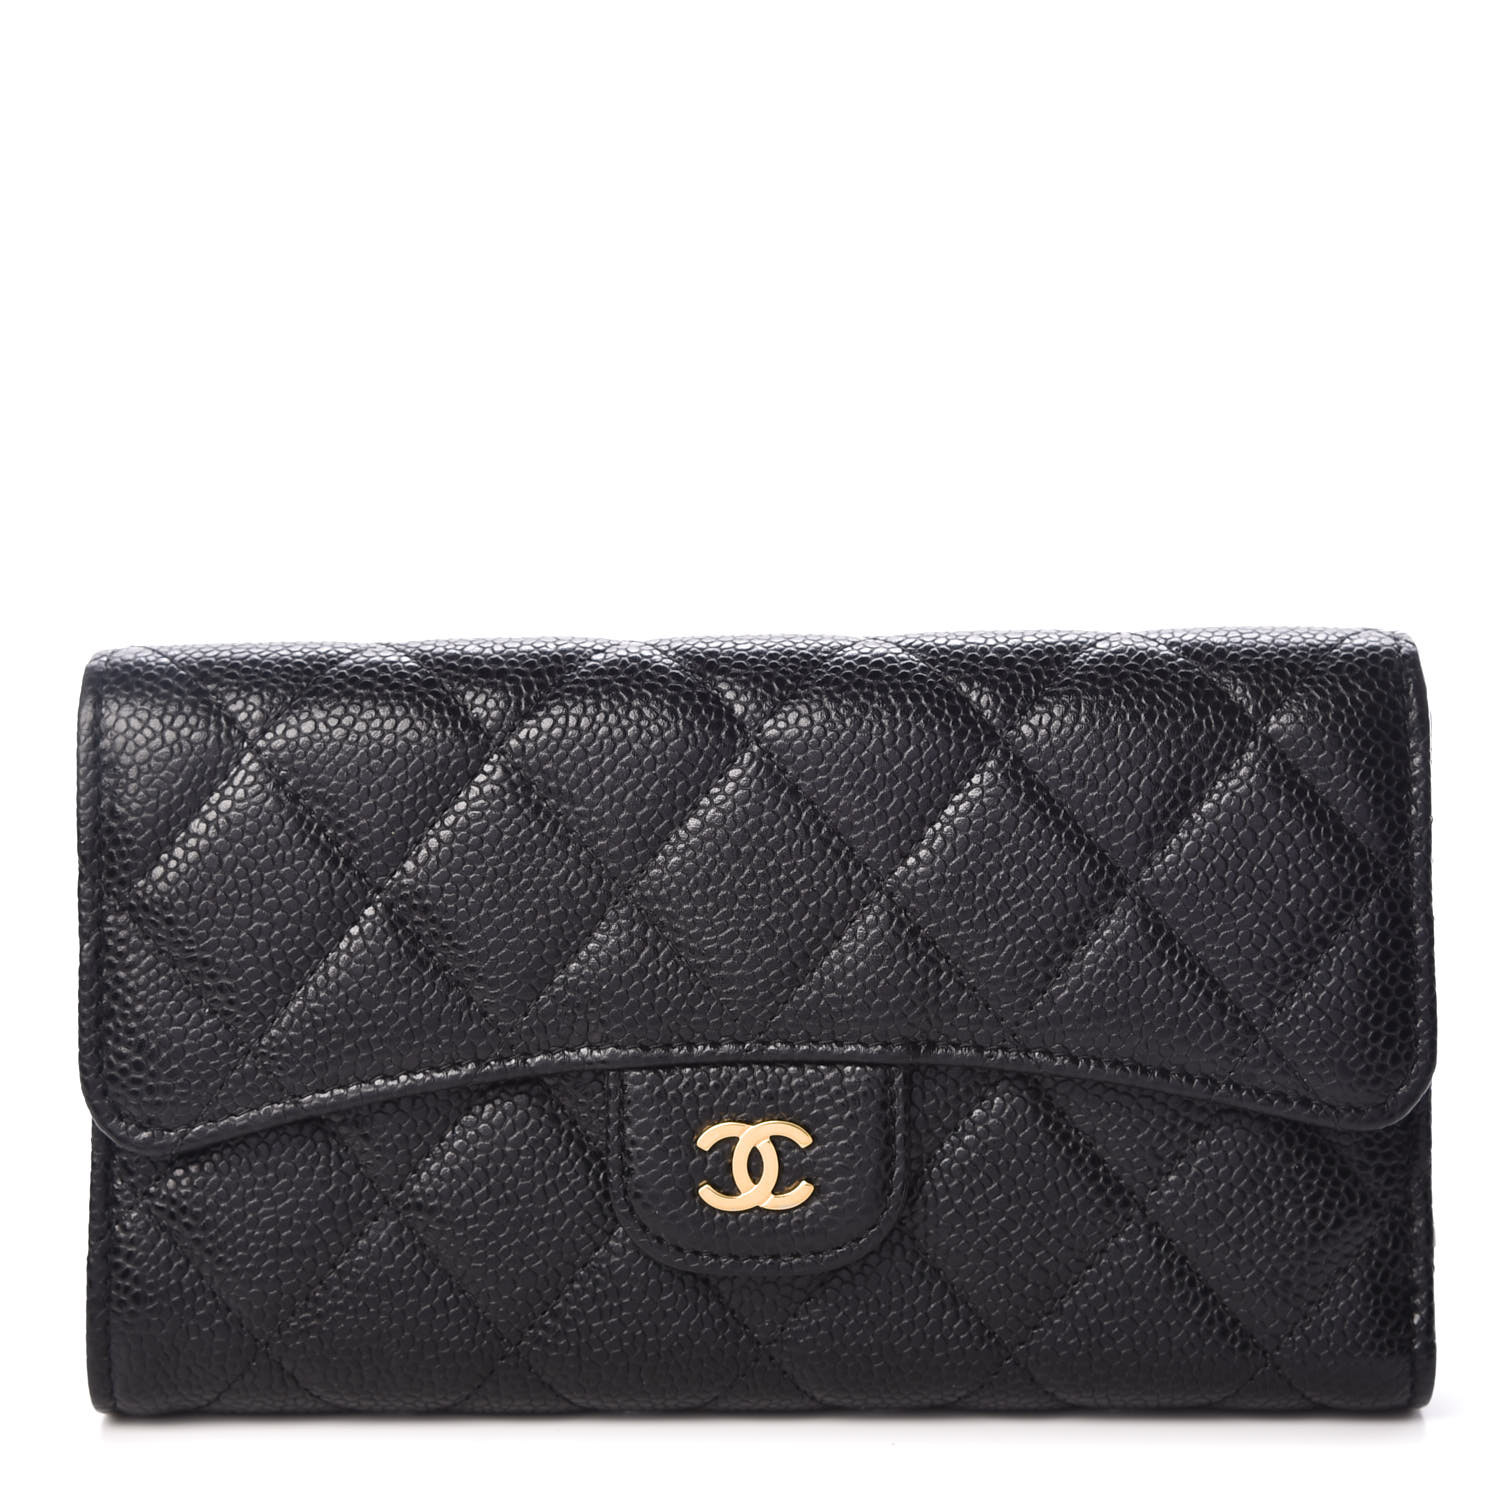 CHANEL Caviar Quilted Long Flap Wallet Black 403821